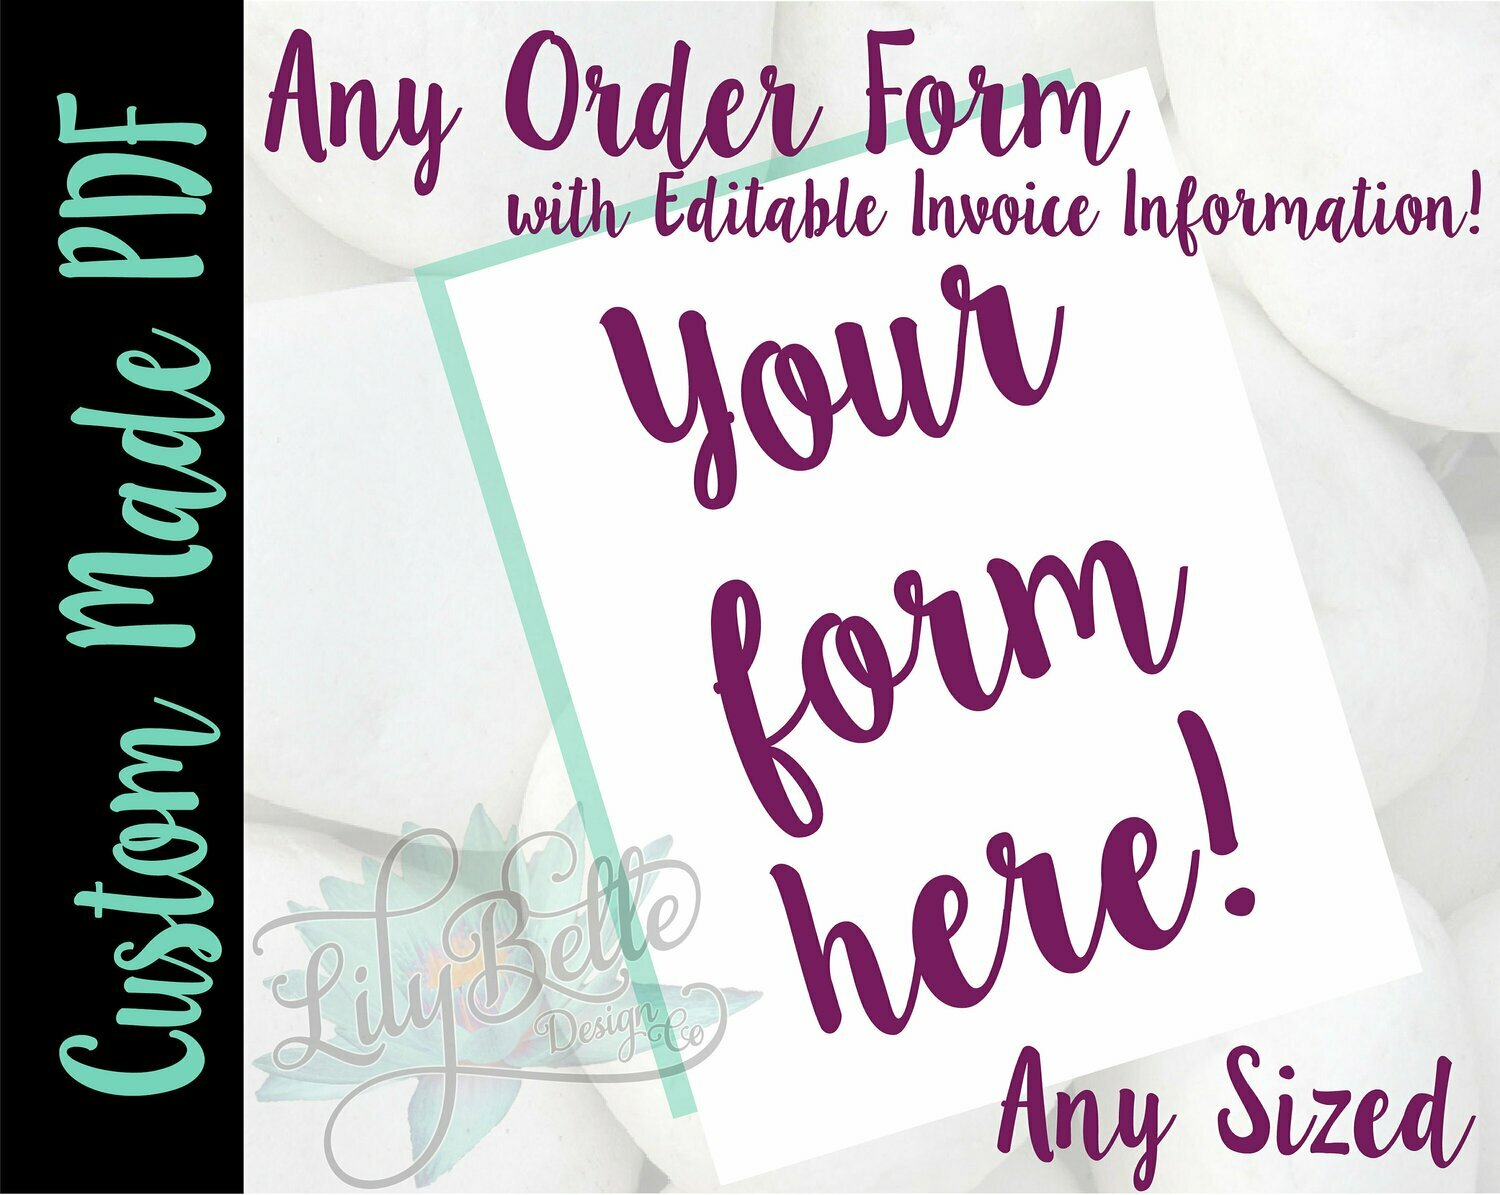 Custom Designed Order Form in PDF & JPG created for you with your Logo, Prcing, and editable invoice information!